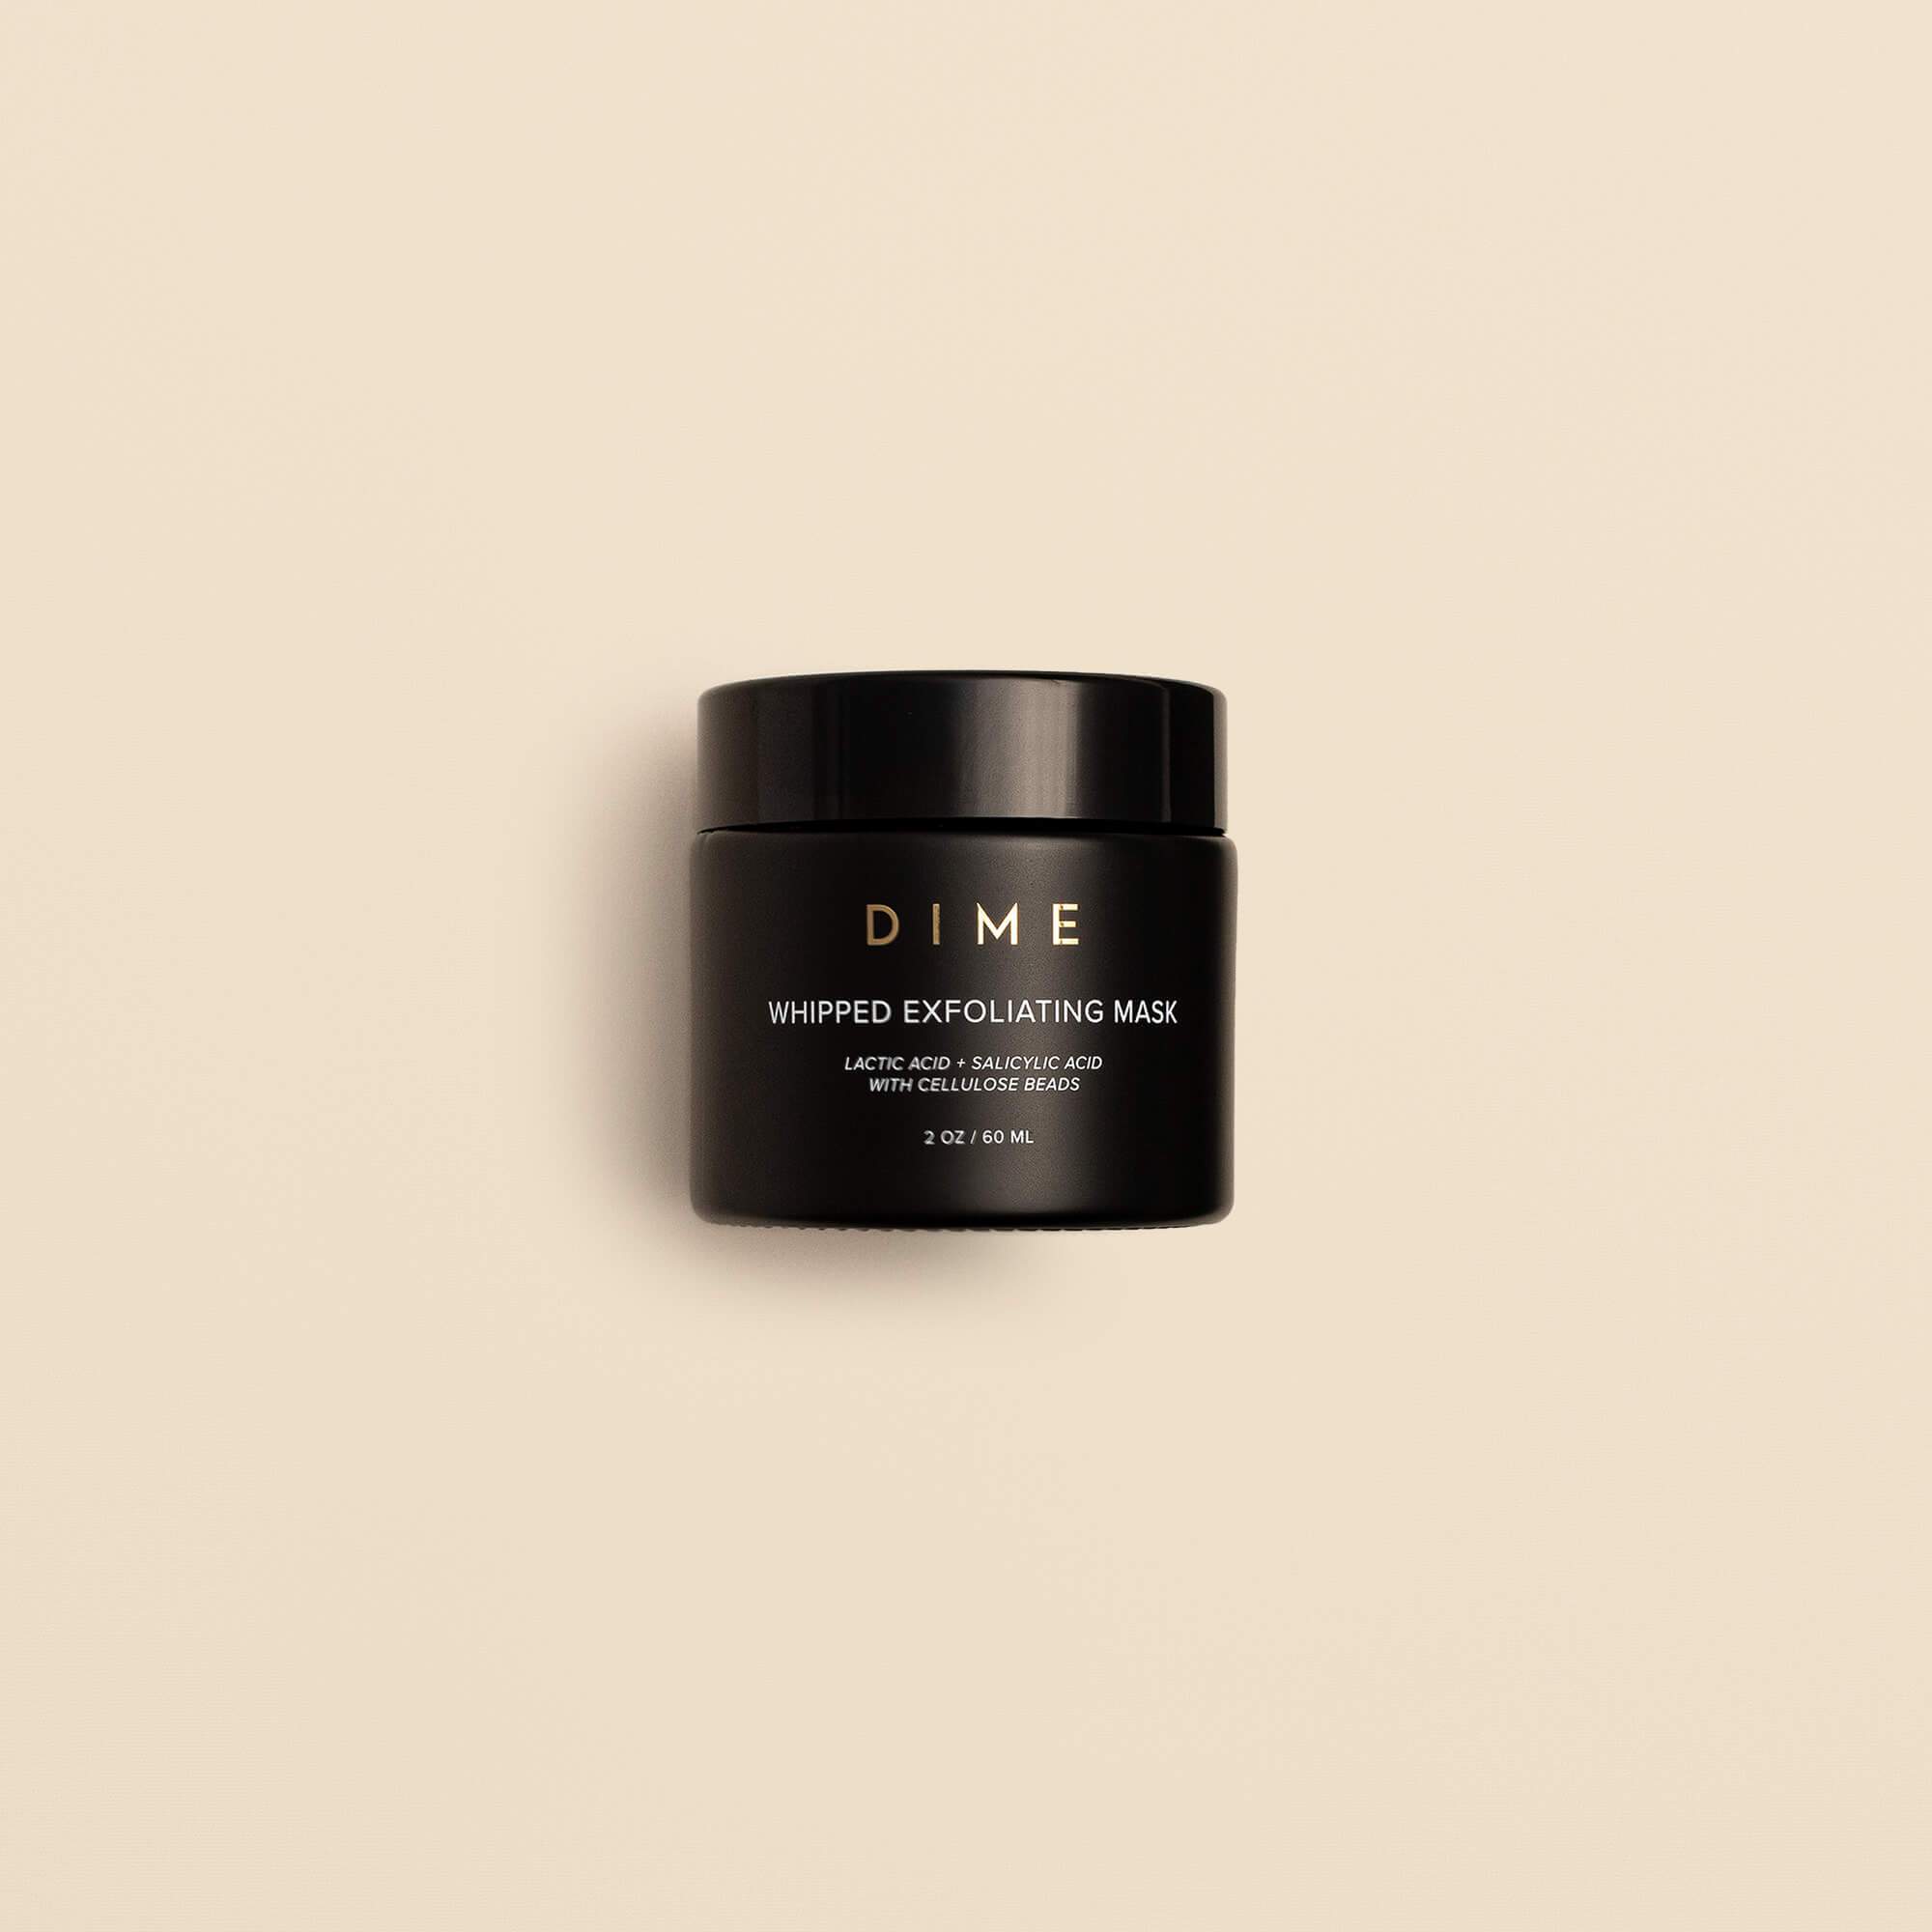 DIME Beauty - Whipped Exfoliating Mask